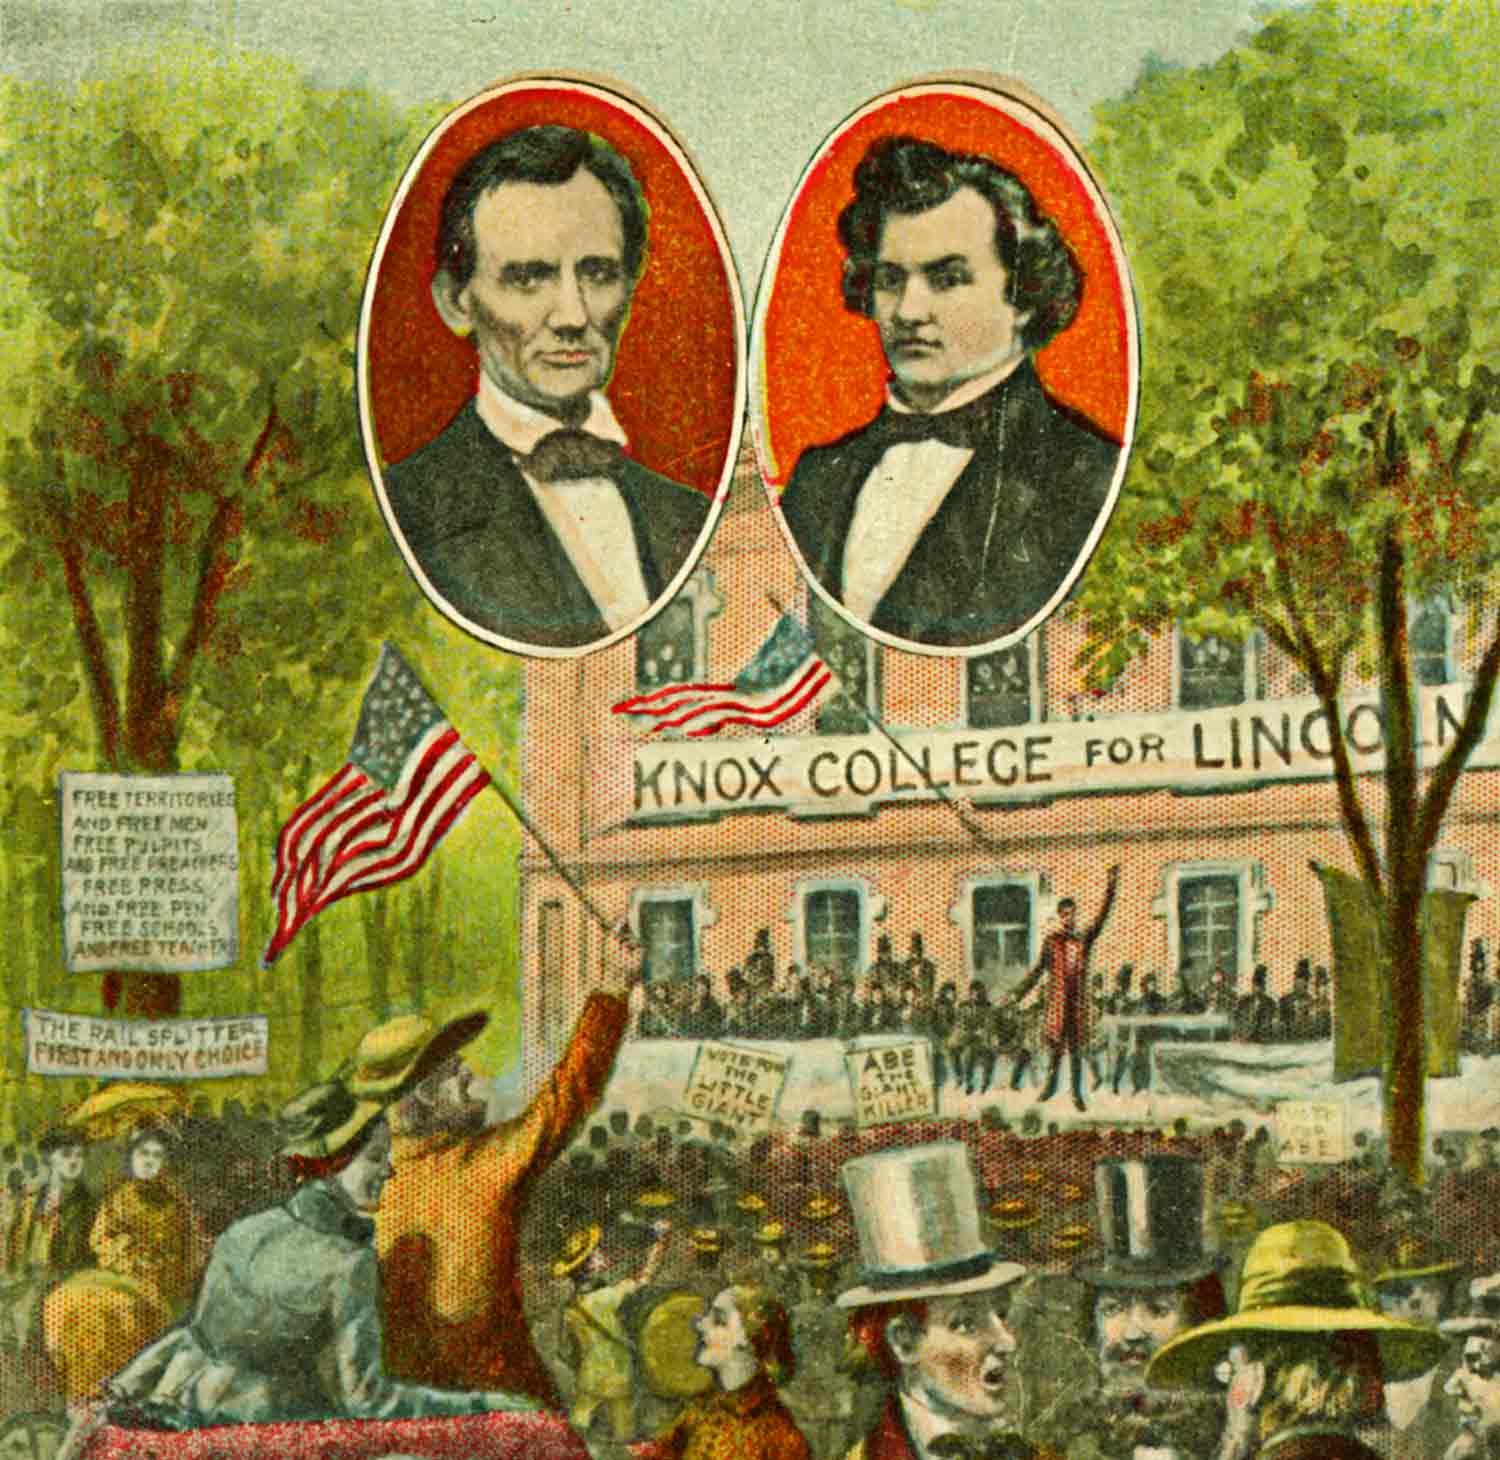 Illustration showing Abraham Lincoln standing on a stage before a crowd and in front of a banner that reads Knox College for Lincoln. Lincoln and Douglas portraits are also featured.